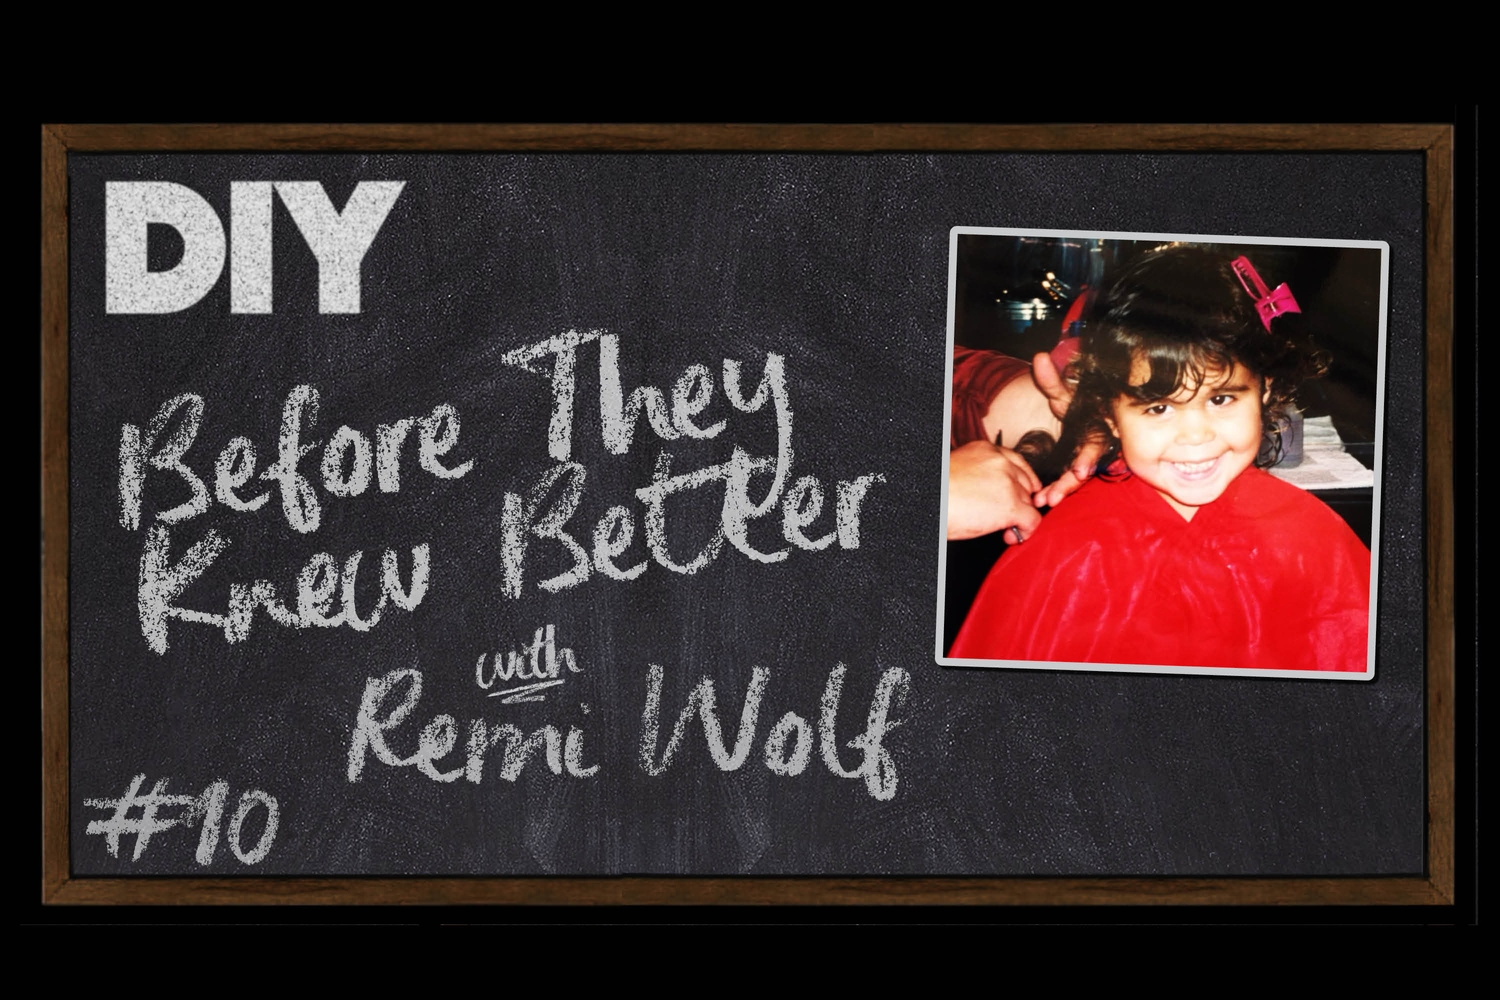 Remi Wolf talks Junior Olympics and Paramore on DIY’s Before They Knew Better podcast